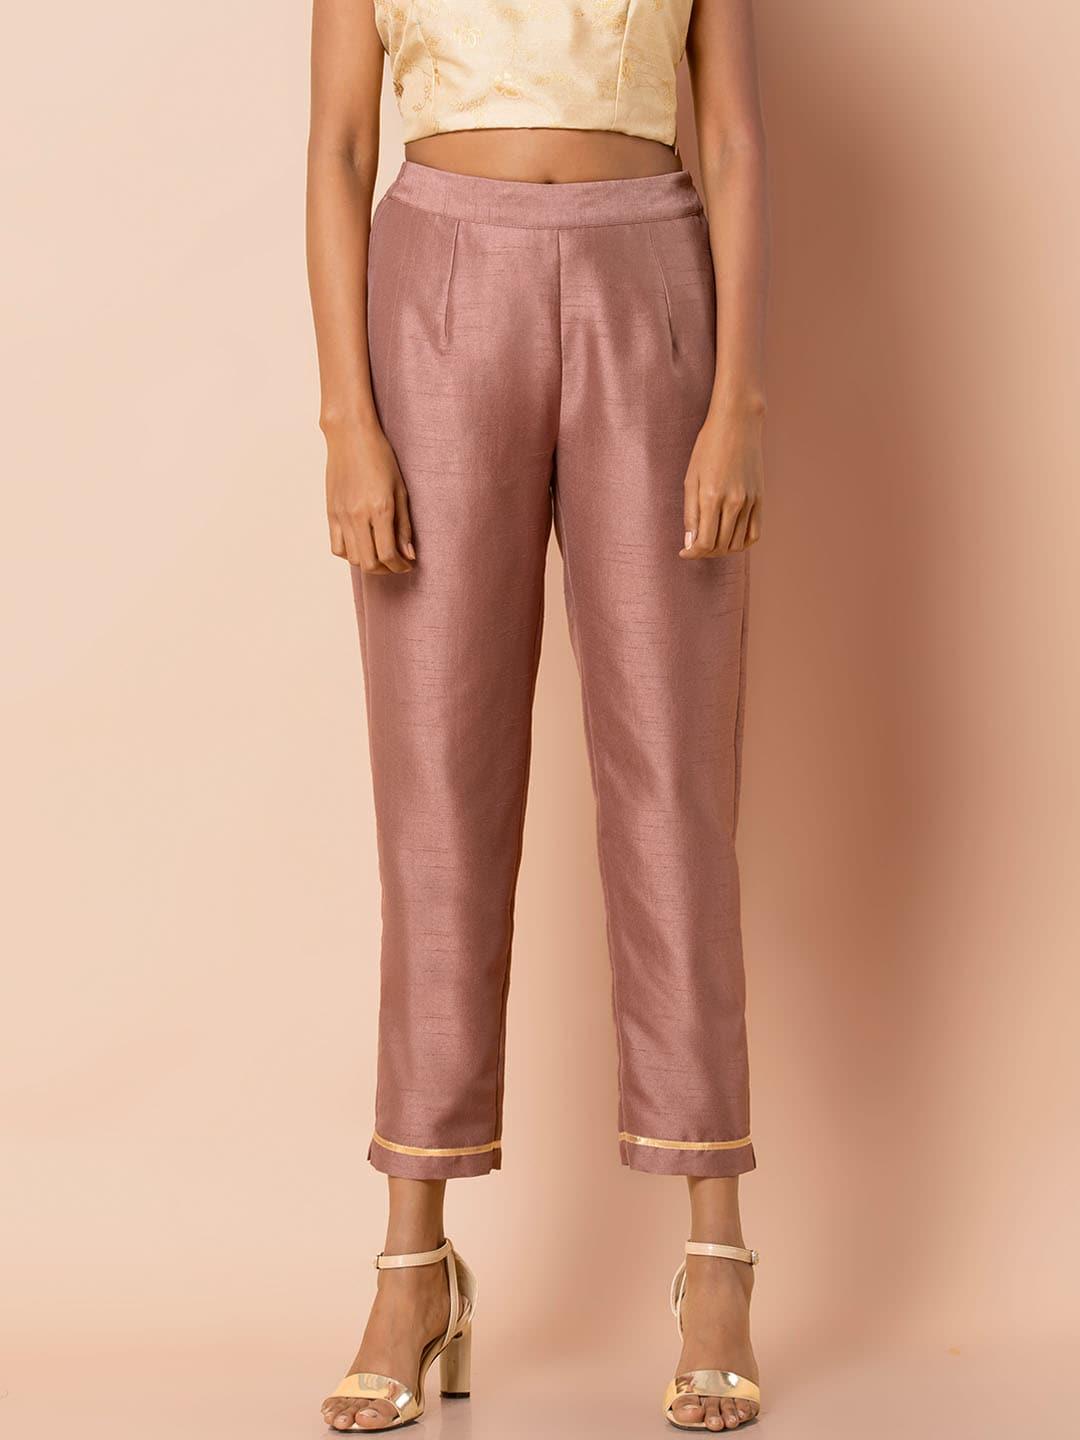 indya-women-pink-slim-fit-solid-cigarette-trousers